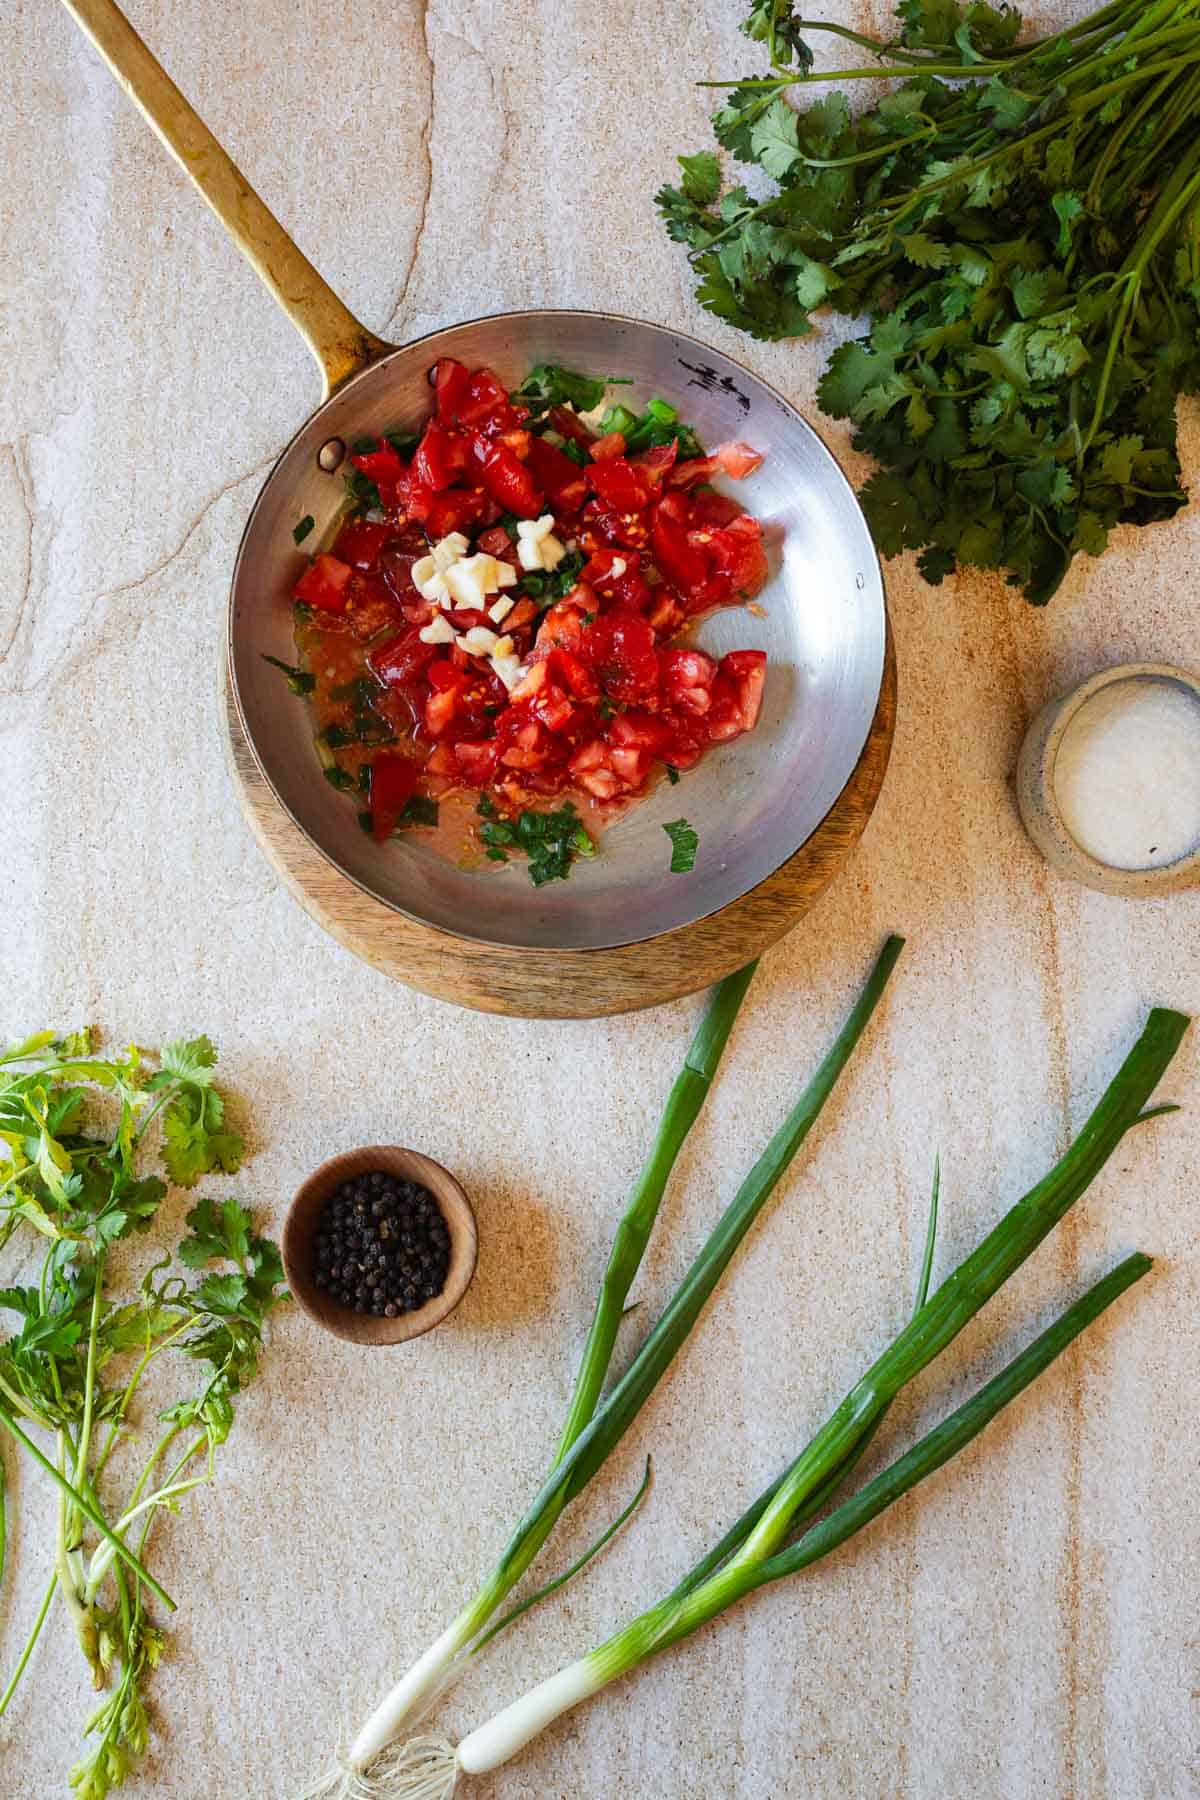 A preparation of diced tomatoes and garlic in a metal bowl with a wooden handle, accompanied by fresh herbs and spices on a kitchen countertop.